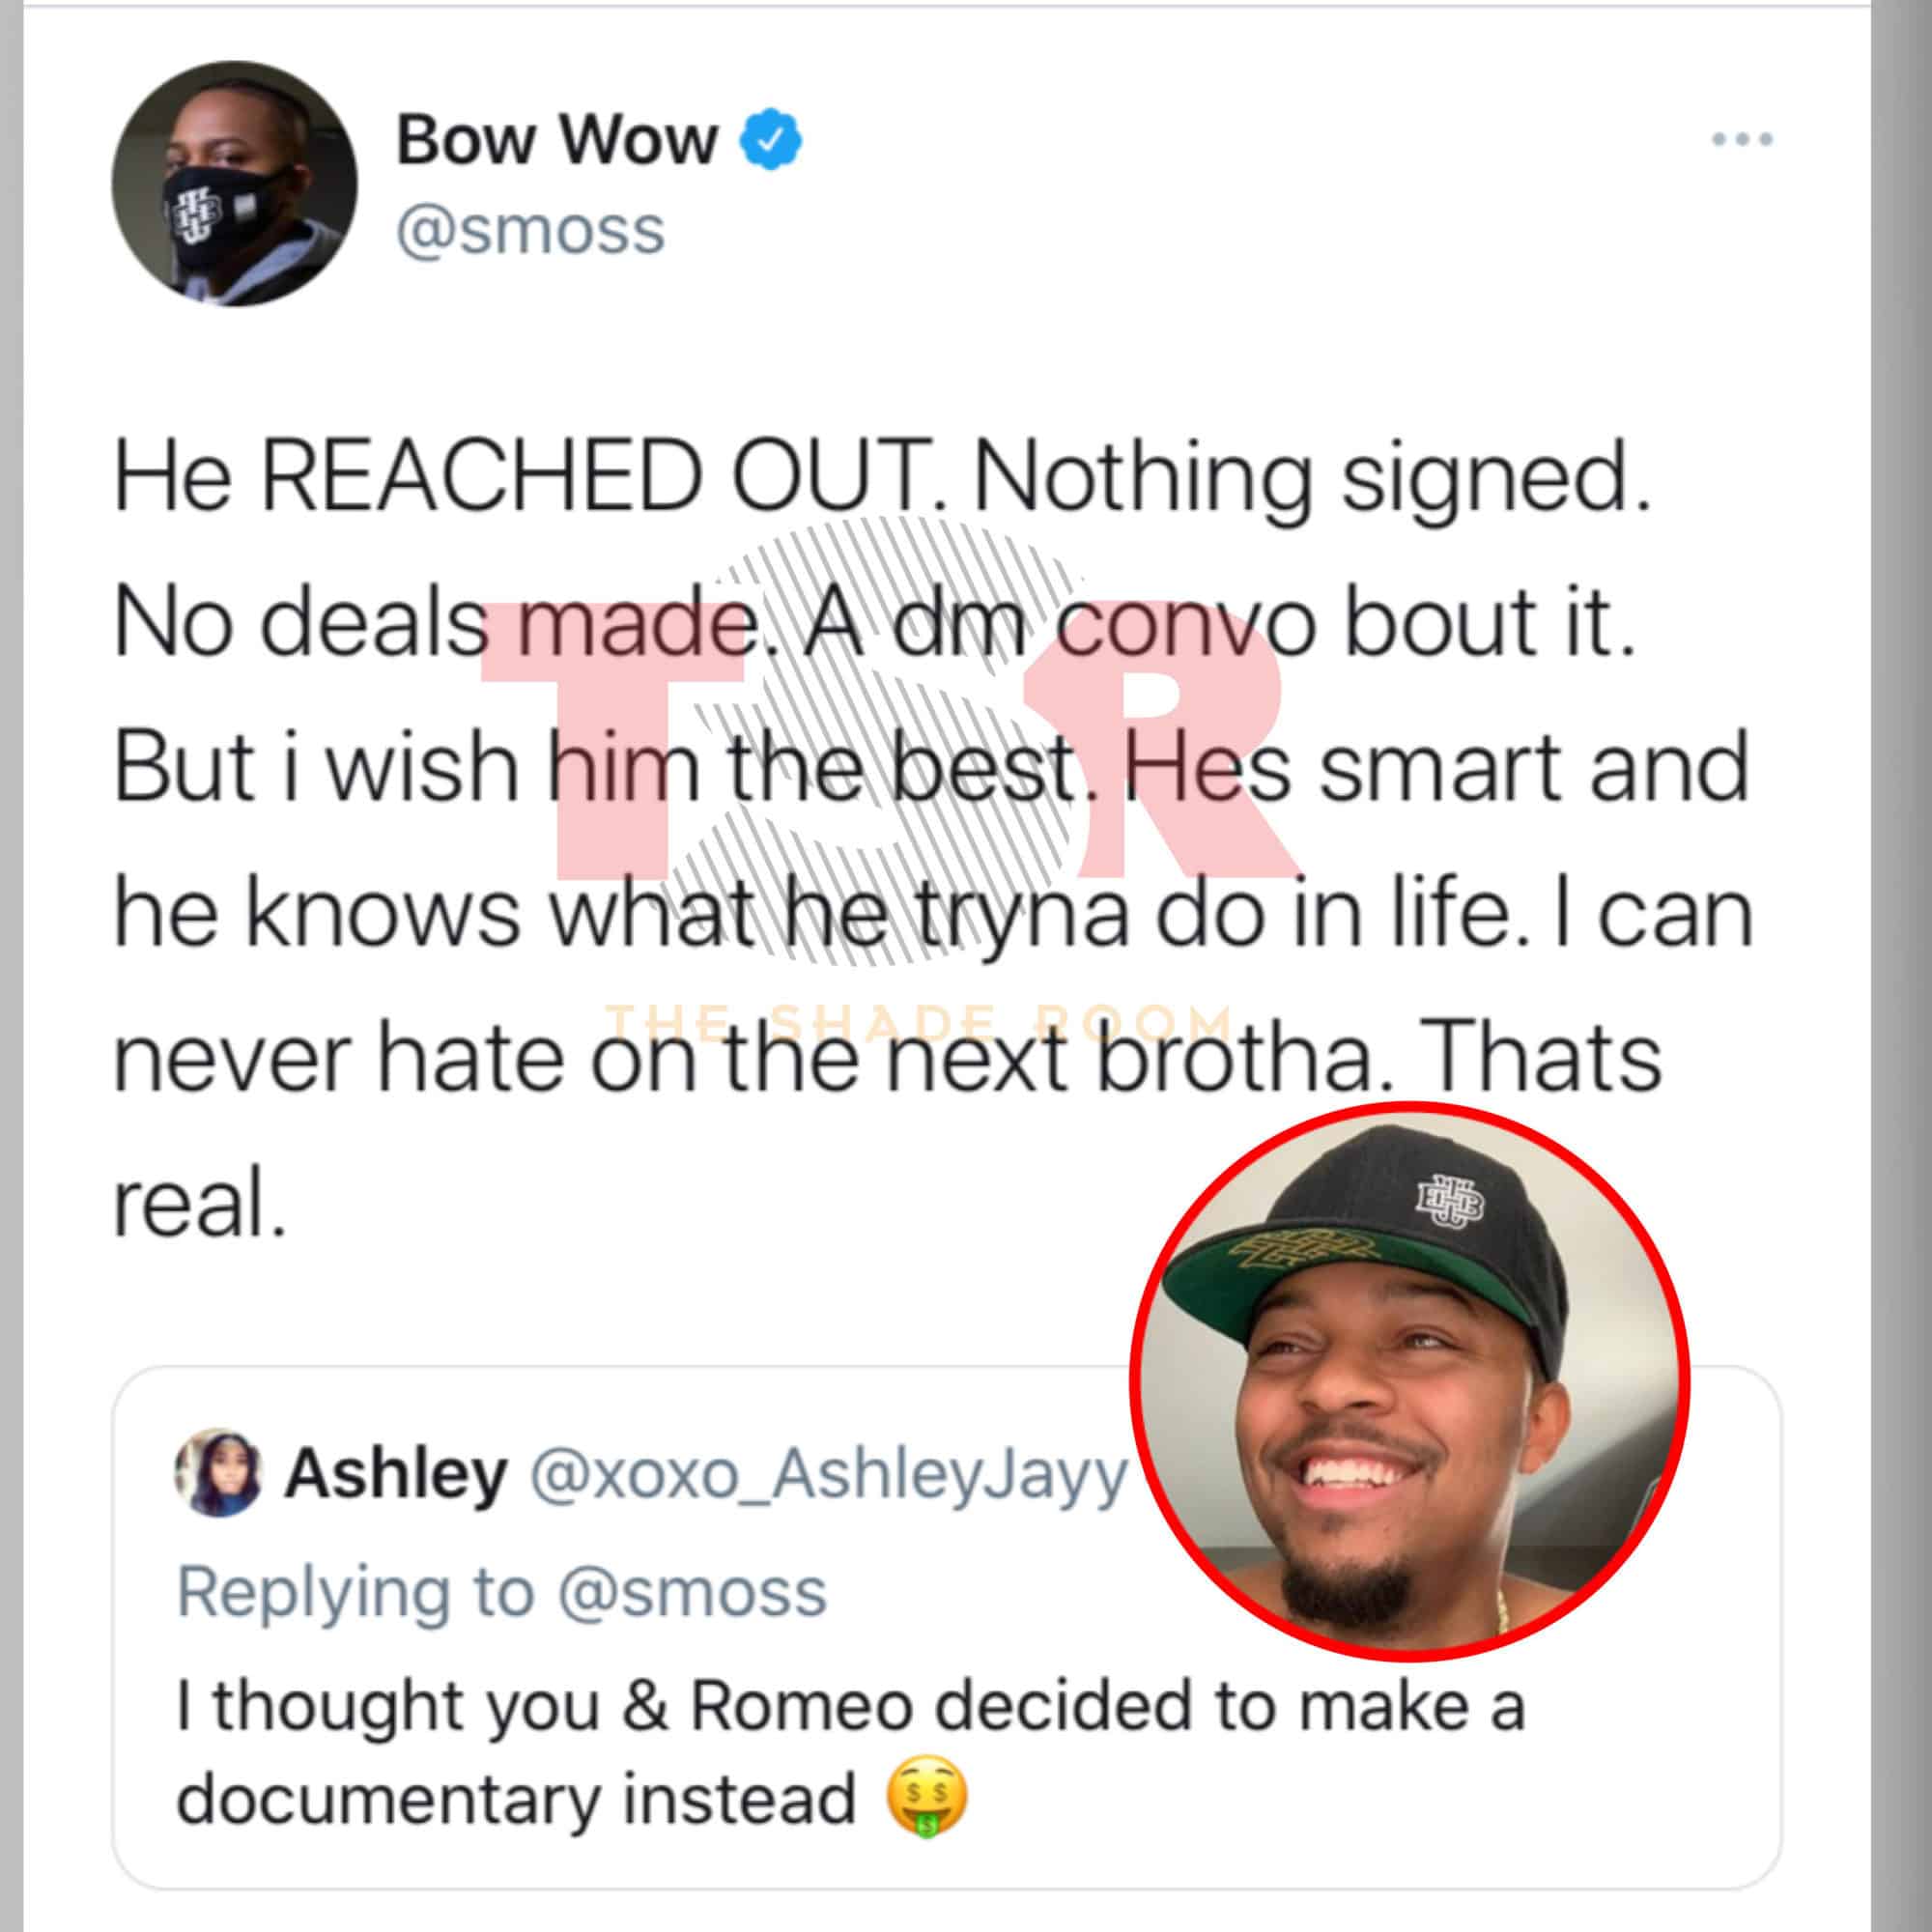 Bow Wow Gives Update On Documentary With Him And Romeo Miller (Update)